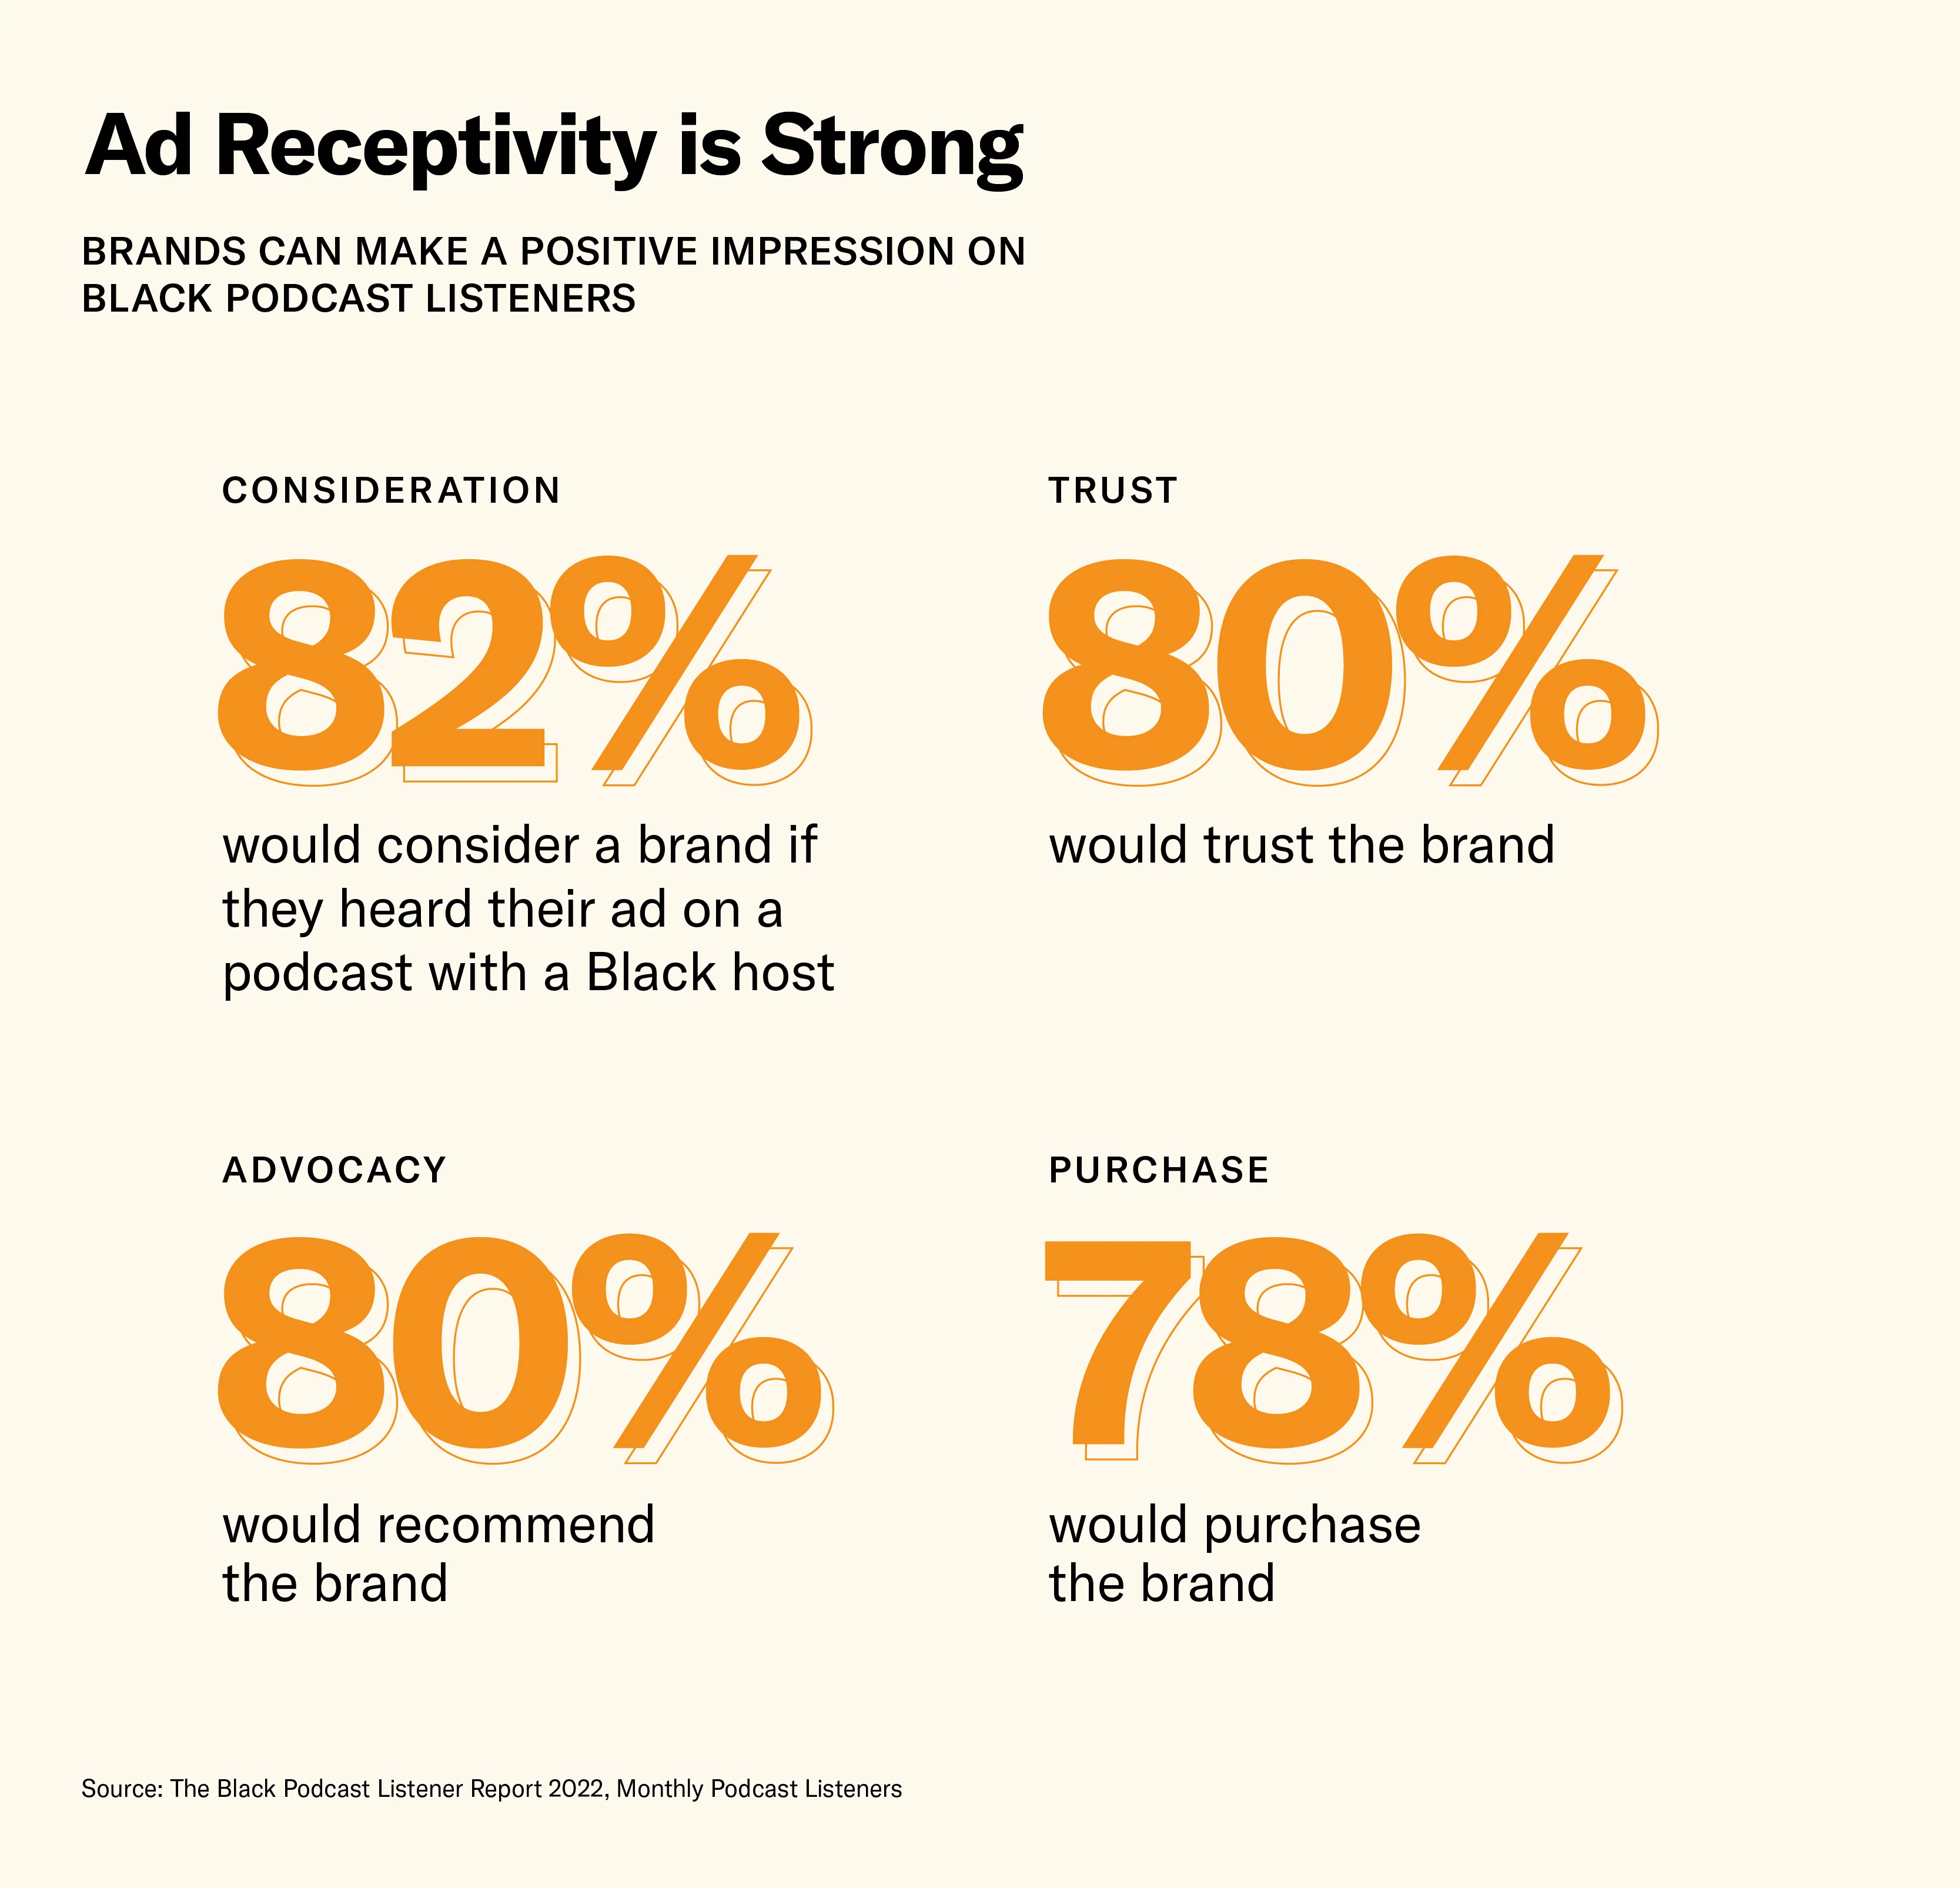 Ad Receptivity is Strong